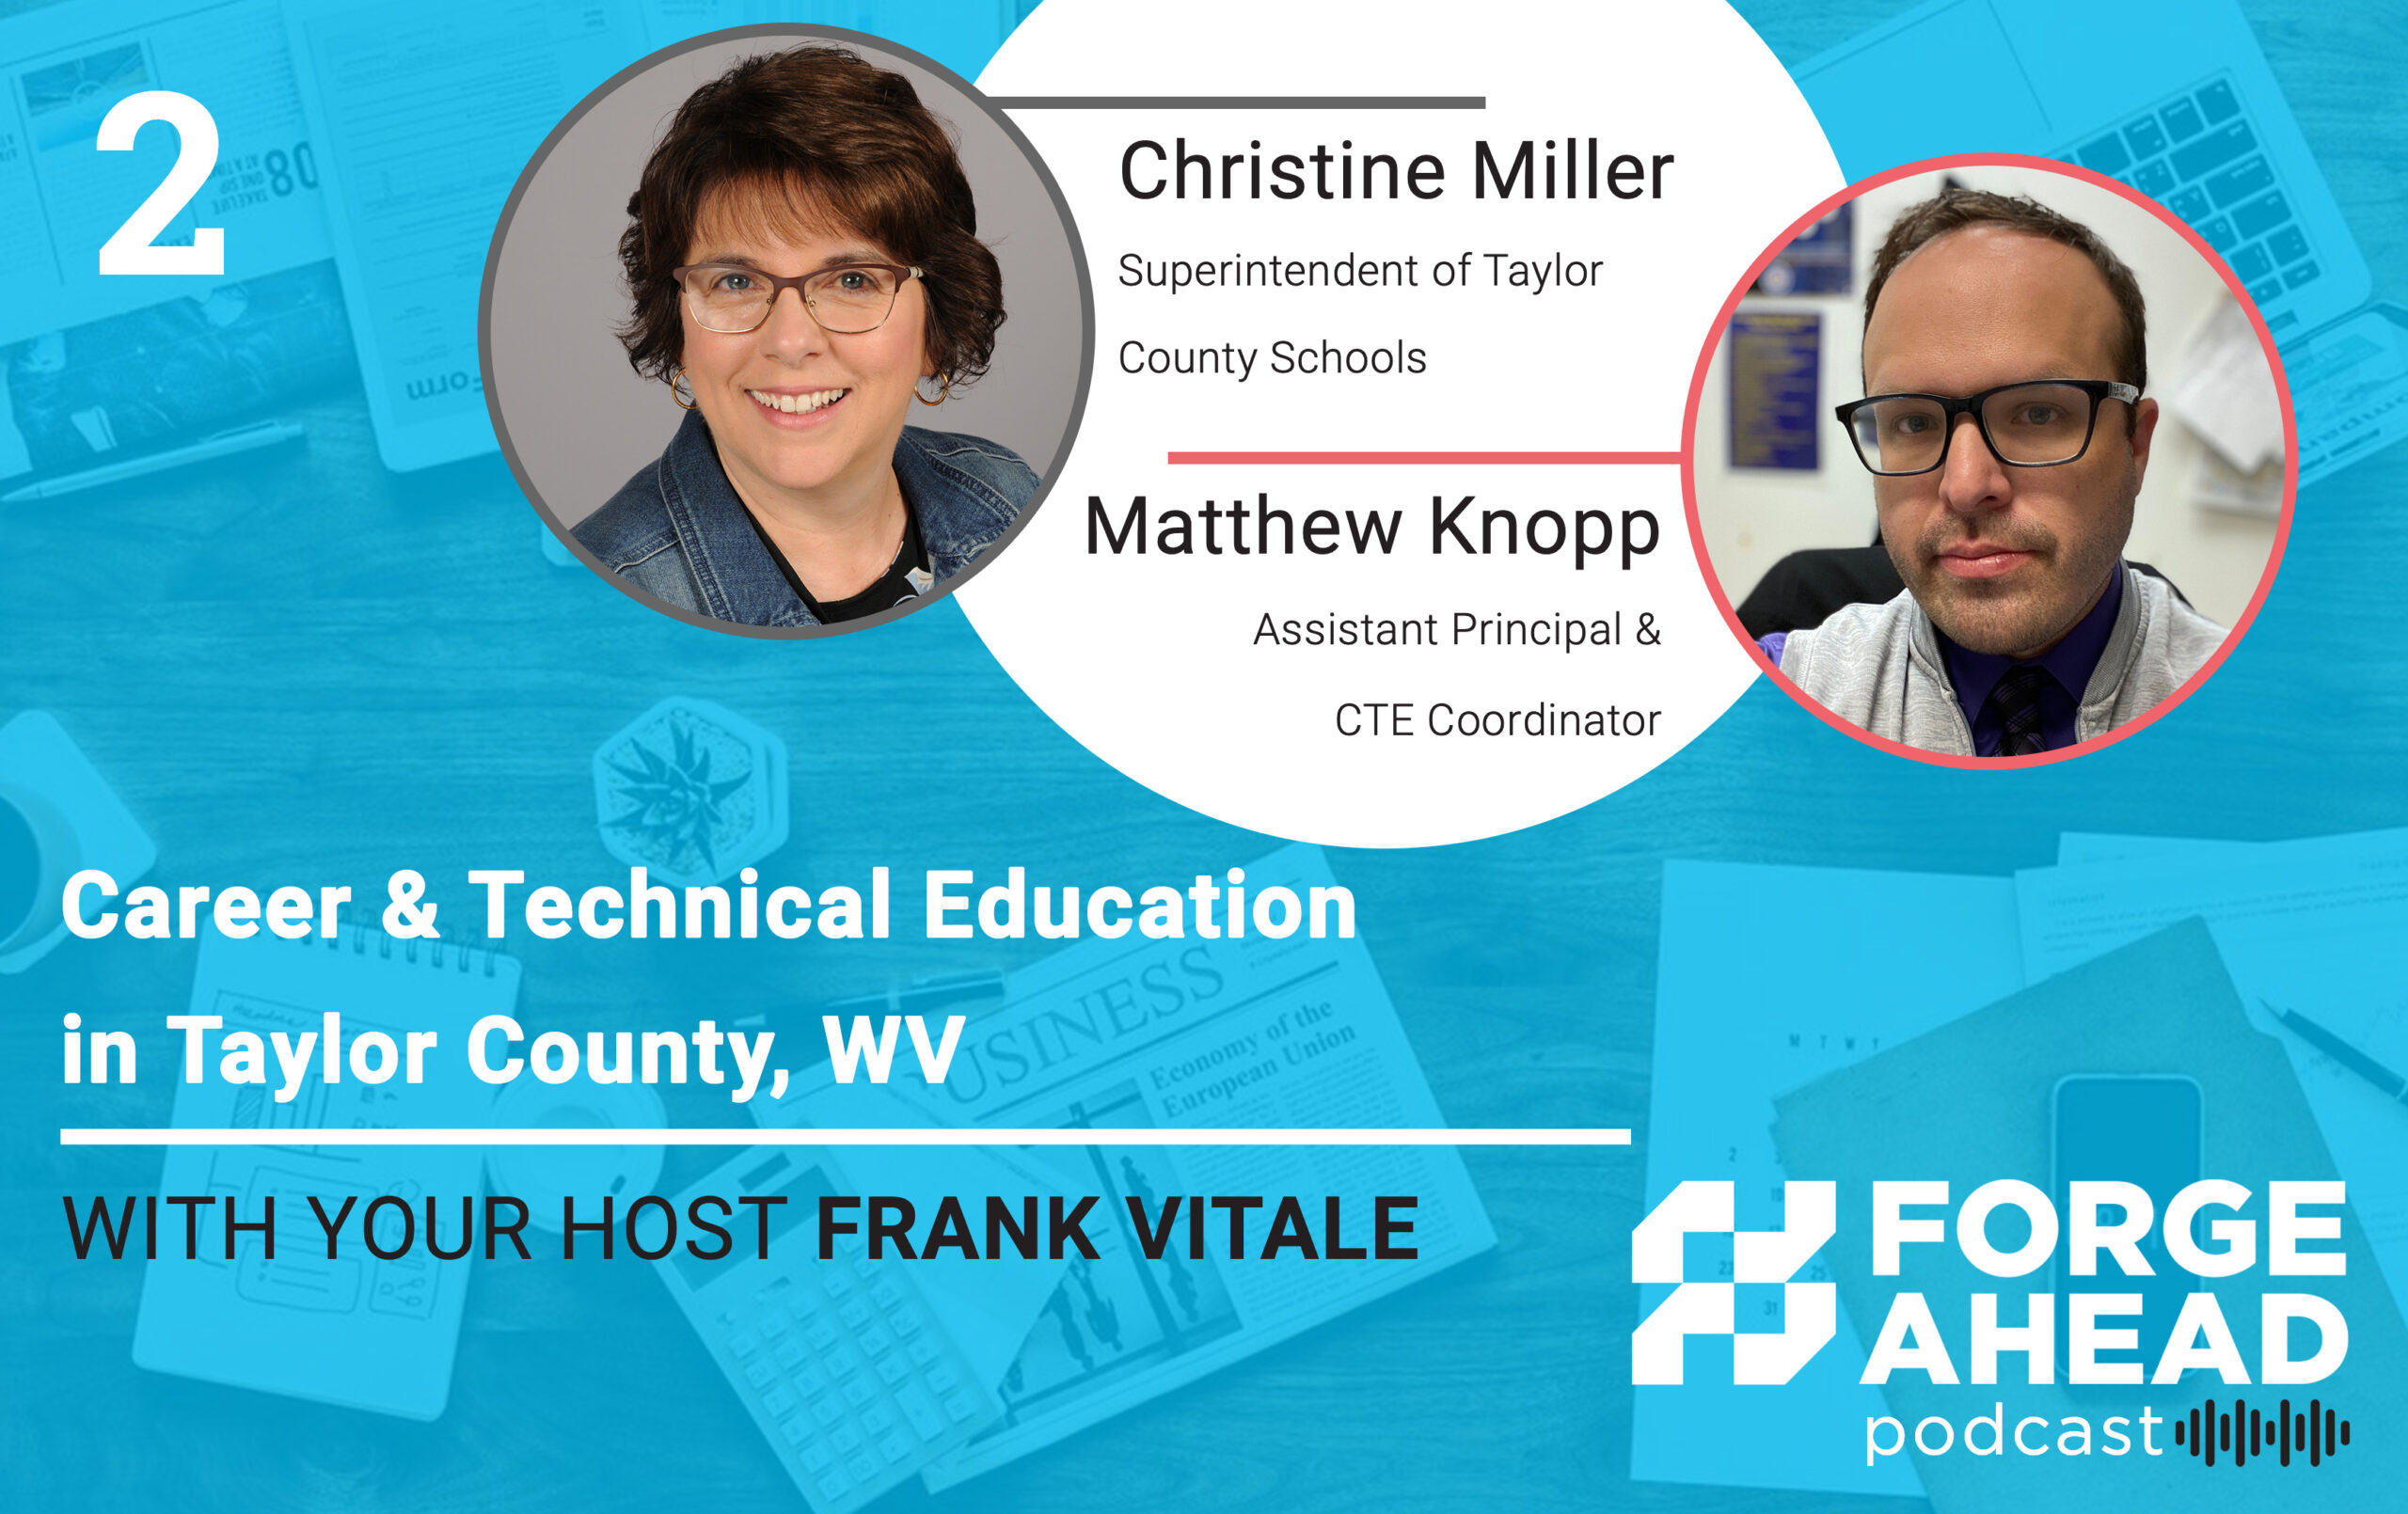 Episode 2: Career & Technical Education in Taylor County, WV